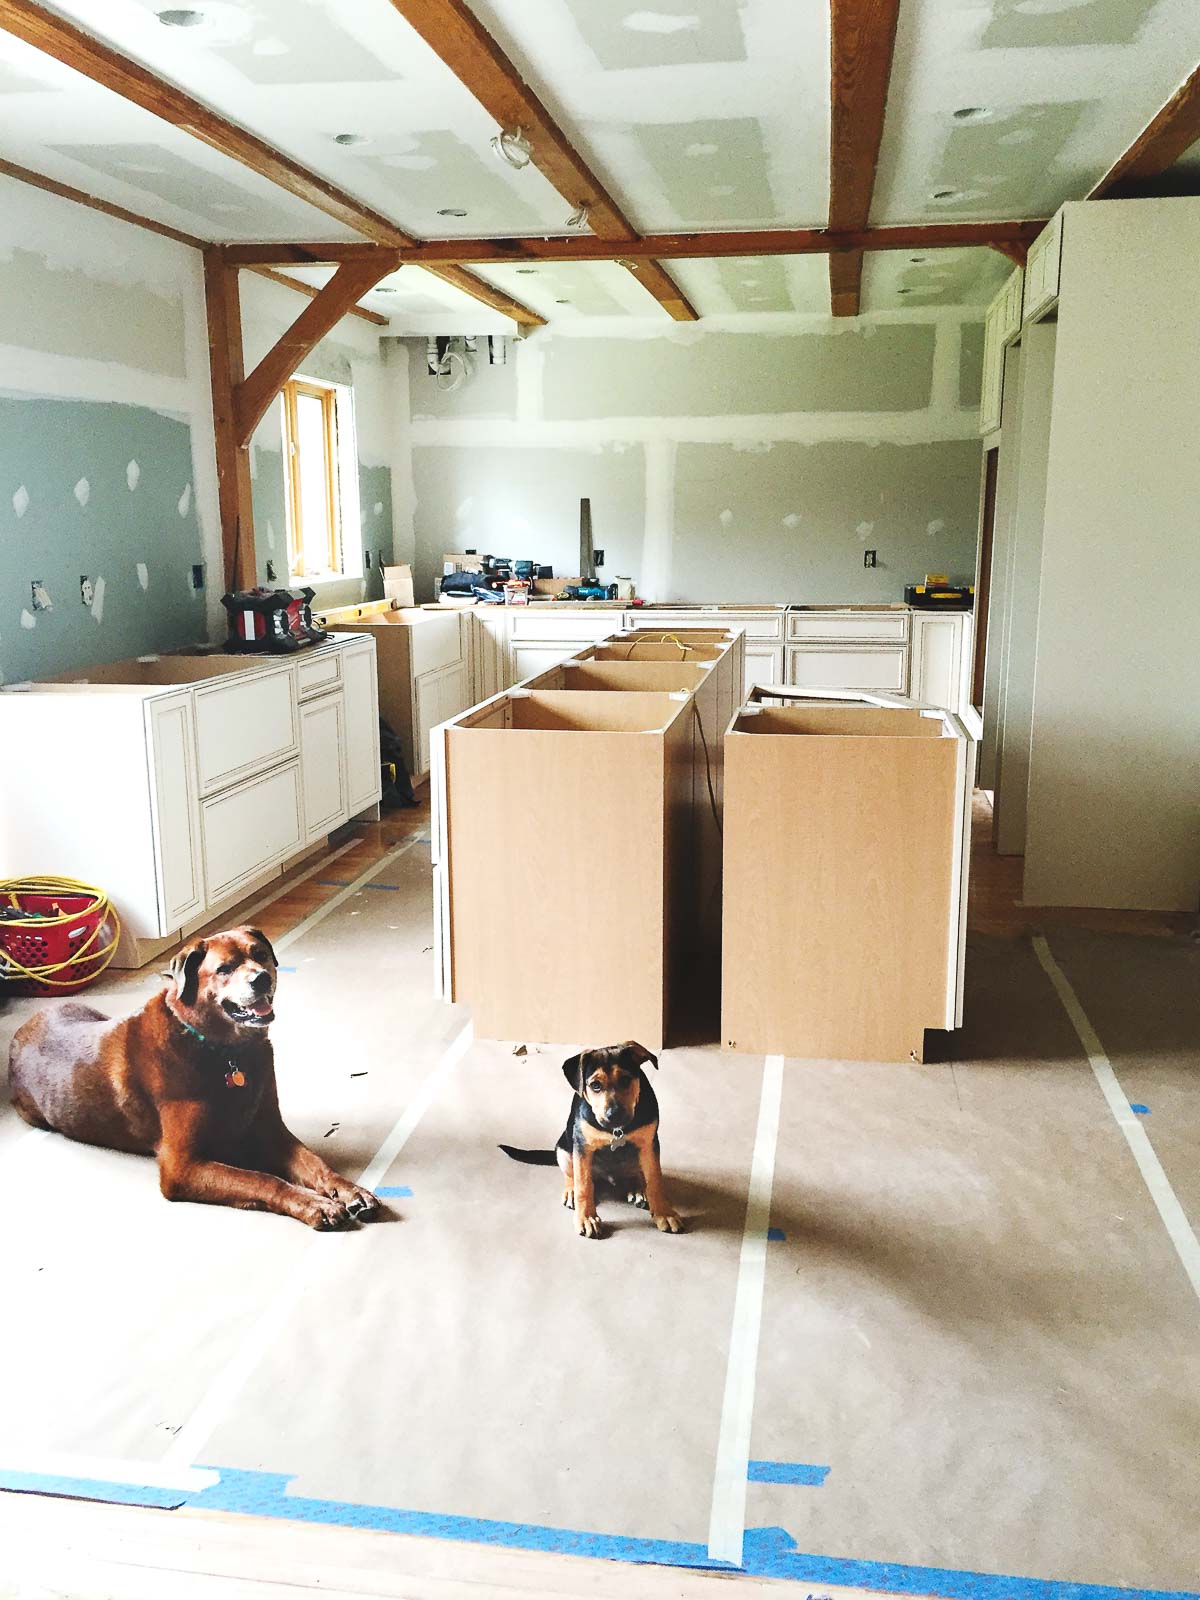 kitchen remodel with dogs jude and franklin laying on the floor